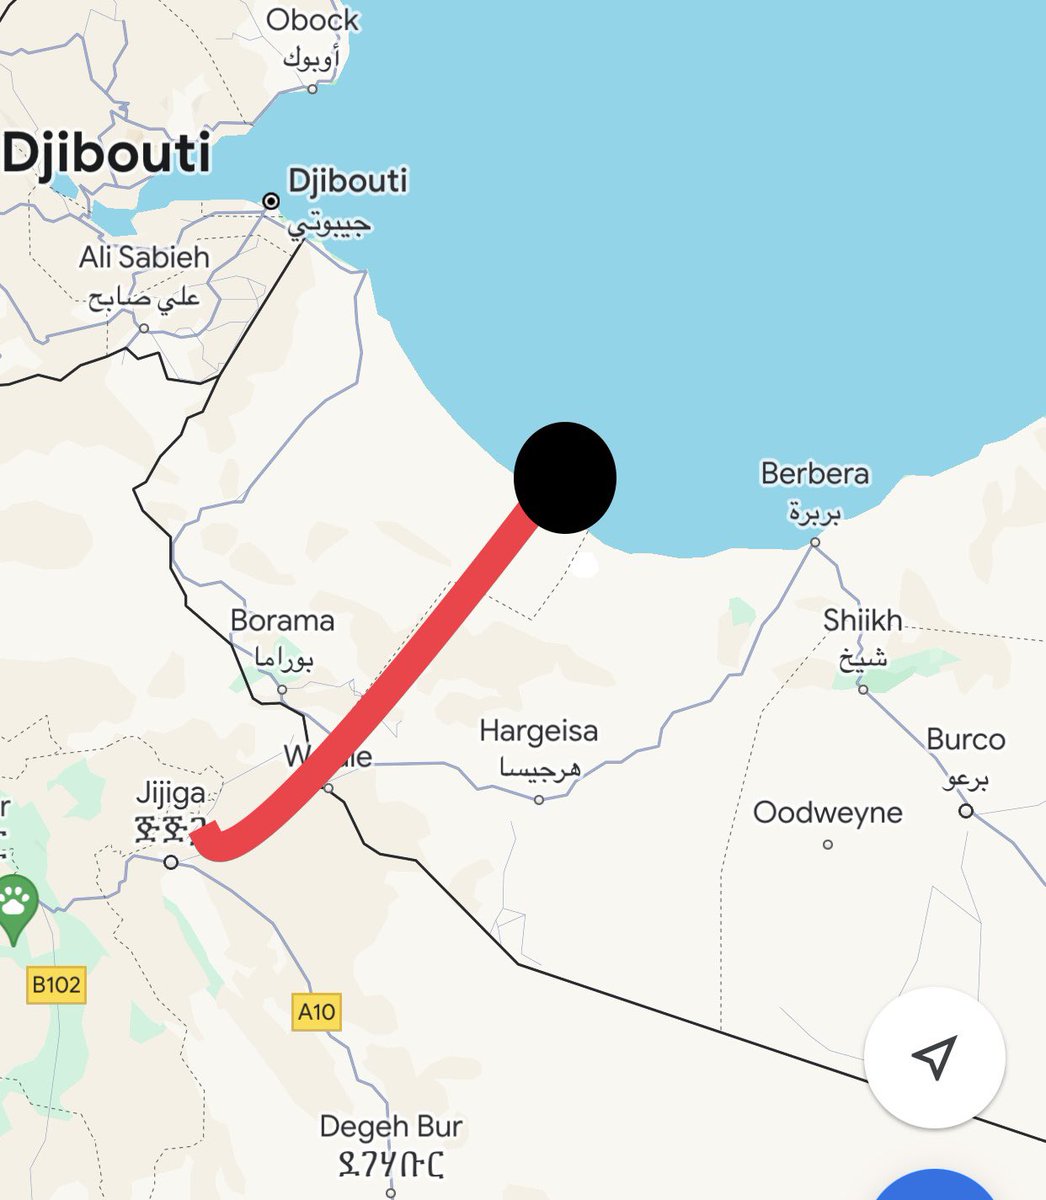 𝐑𝐞𝐝𝐰𝐚𝐧 & 𝐀𝐥-𝐀𝐲𝐝𝐚𝐫𝐨𝐮𝐬𝐢 𝐜𝐨𝐦𝐦𝐞𝐧𝐭𝐬:

Both Redwan & Al-Aydarousi gave hints as to what the details of the deal would look like! From what they said, let me point out this: 
1) Ethiopia Lughaya dusheda degta! 
2) Dekadas o ku xidhanta Ethiopia (Awbarre ama…